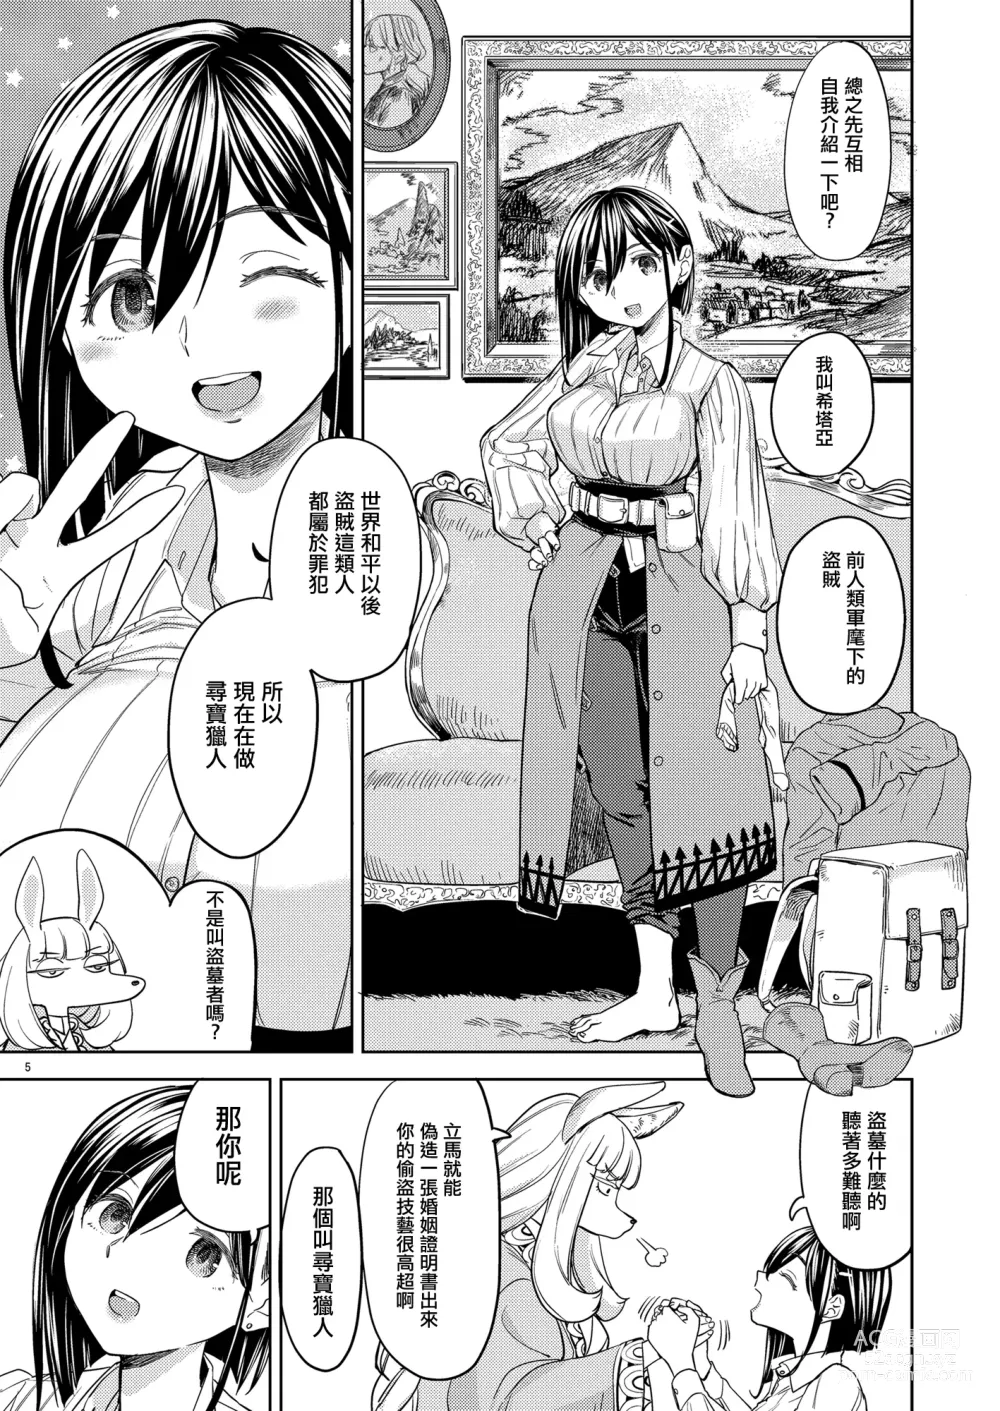 Page 9 of doujinshi 來一場蜜月旅行